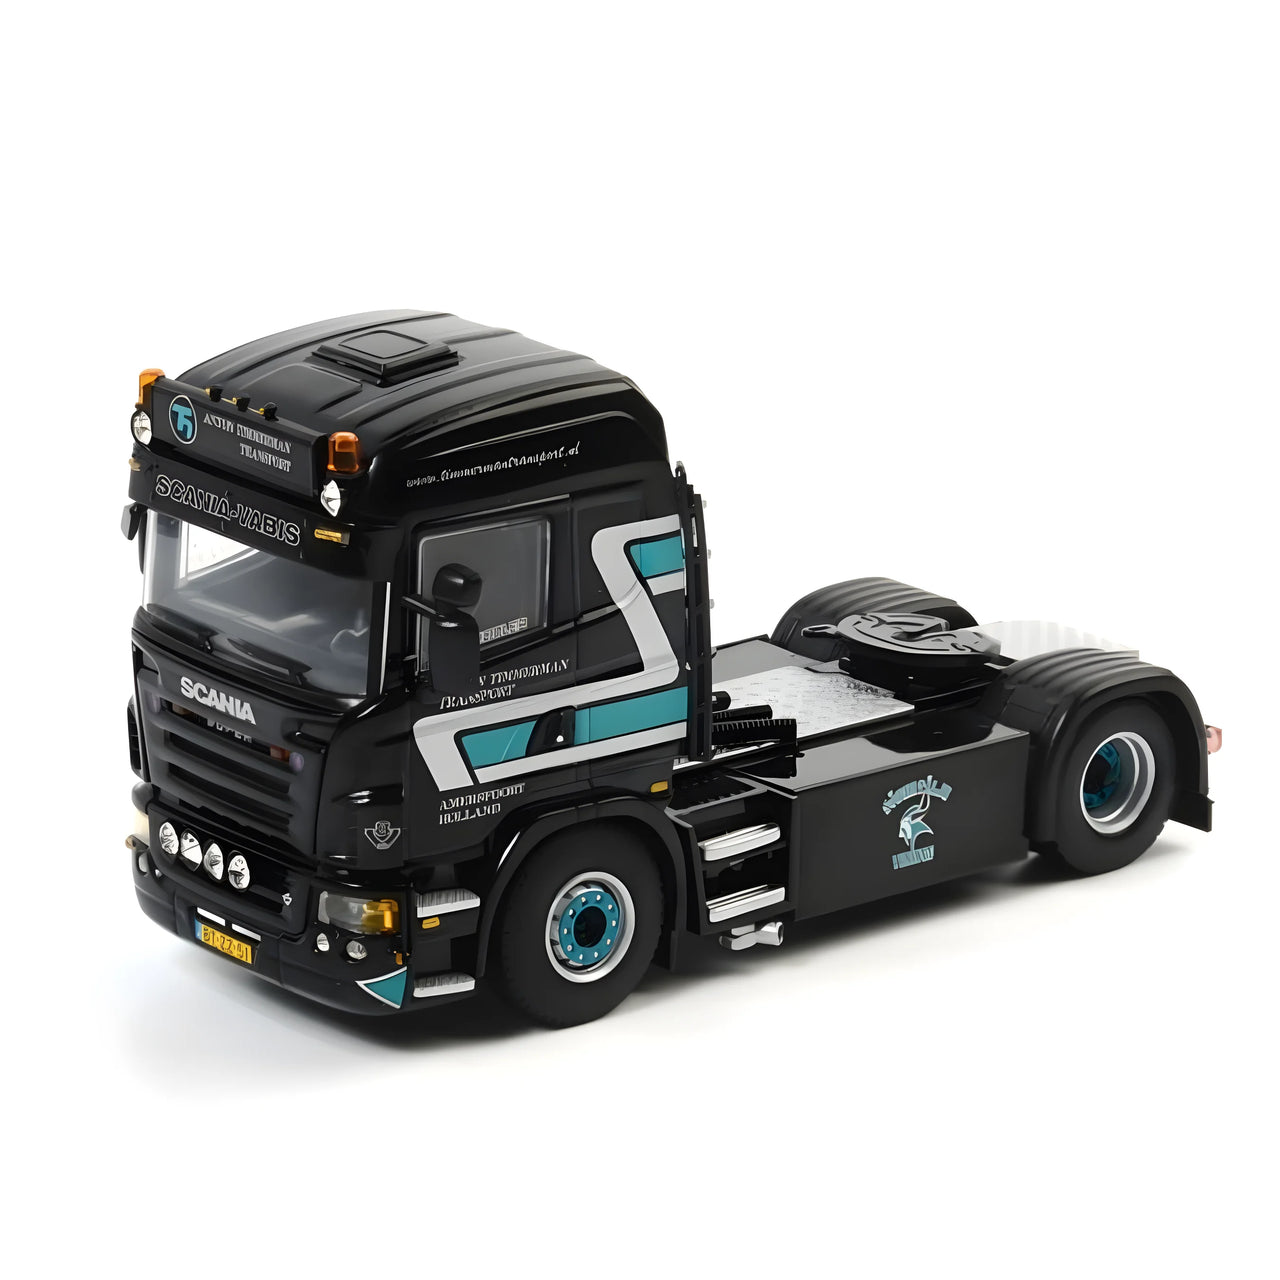 01-1132 Scania Tractor Truck Scale 1:50 (Discontinued Model)